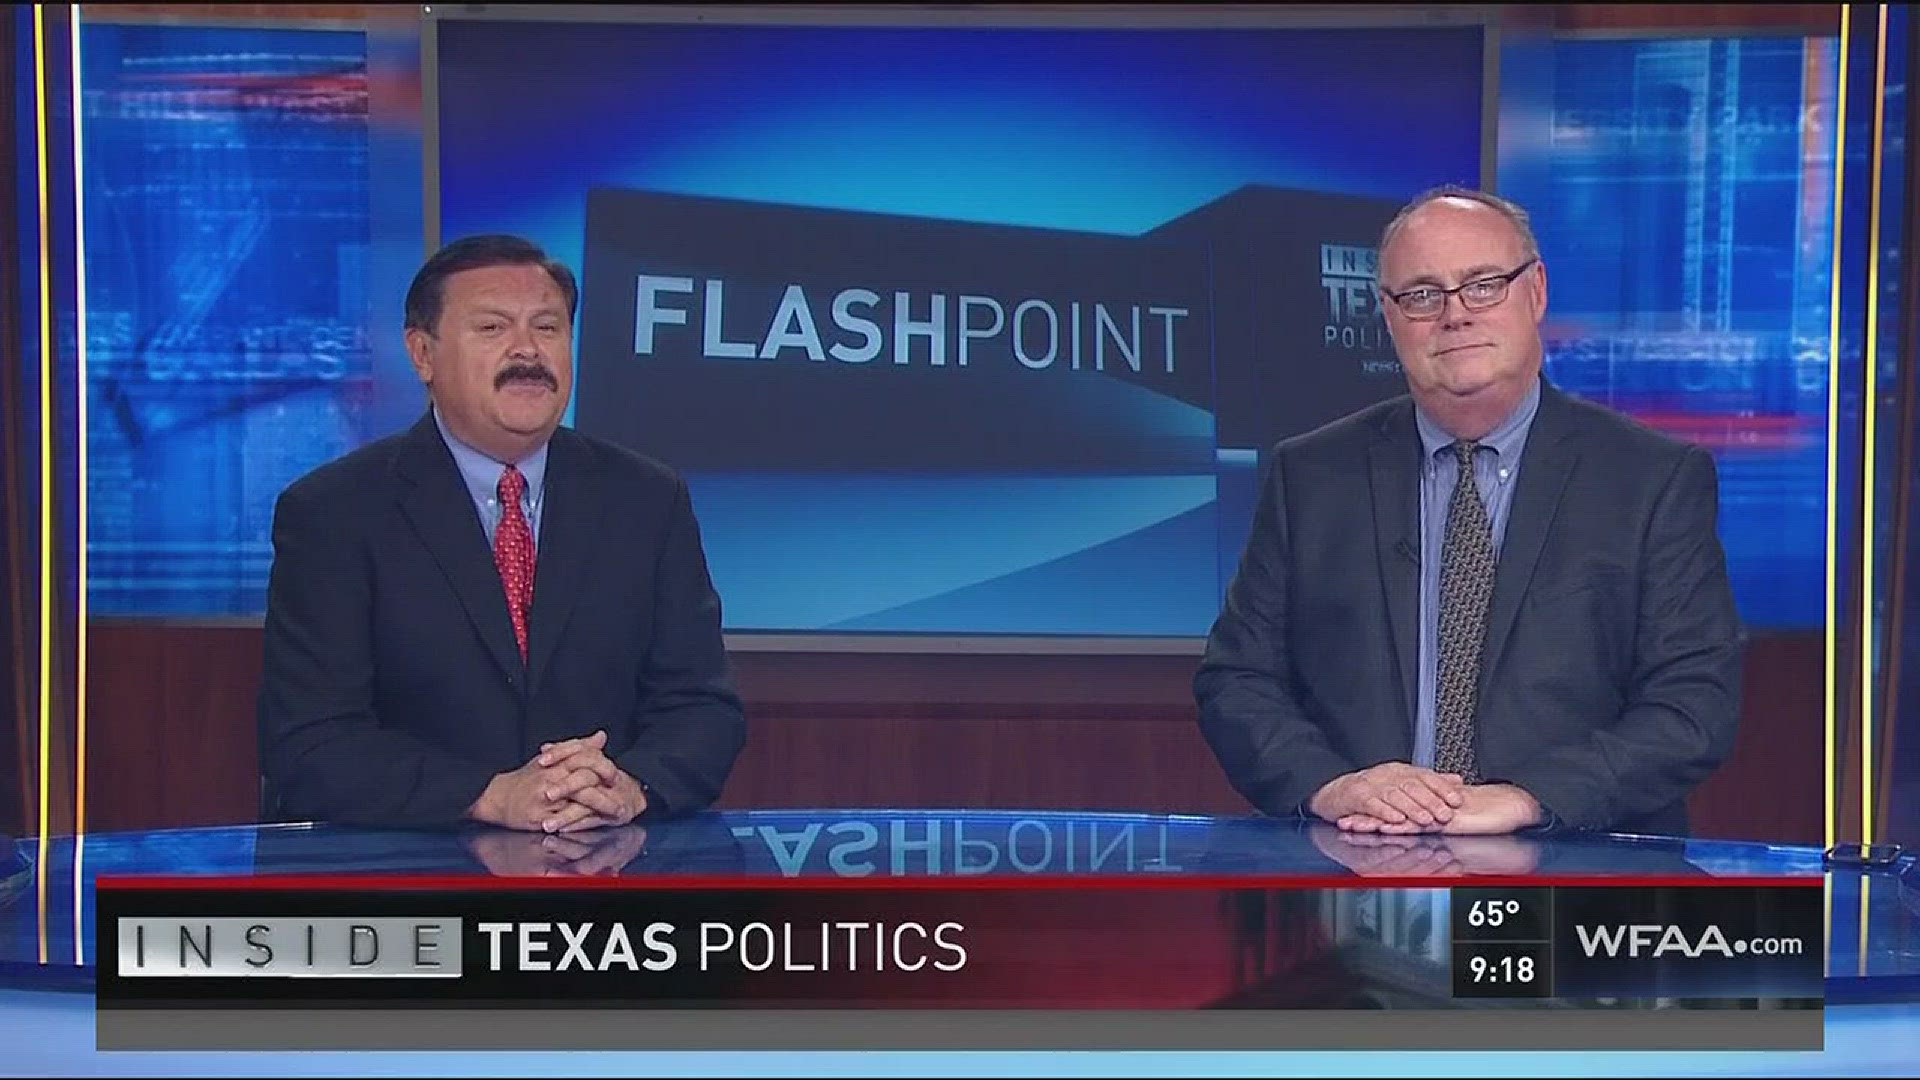 Turnout in early voting was up significantly for Democrats. Republicans sound a little spooked by it.  Should the GOP be concerned? That question is debated in Flashpoint. From the right, Mark Davis of 660 AM The Answer. And from the left, former Democrat